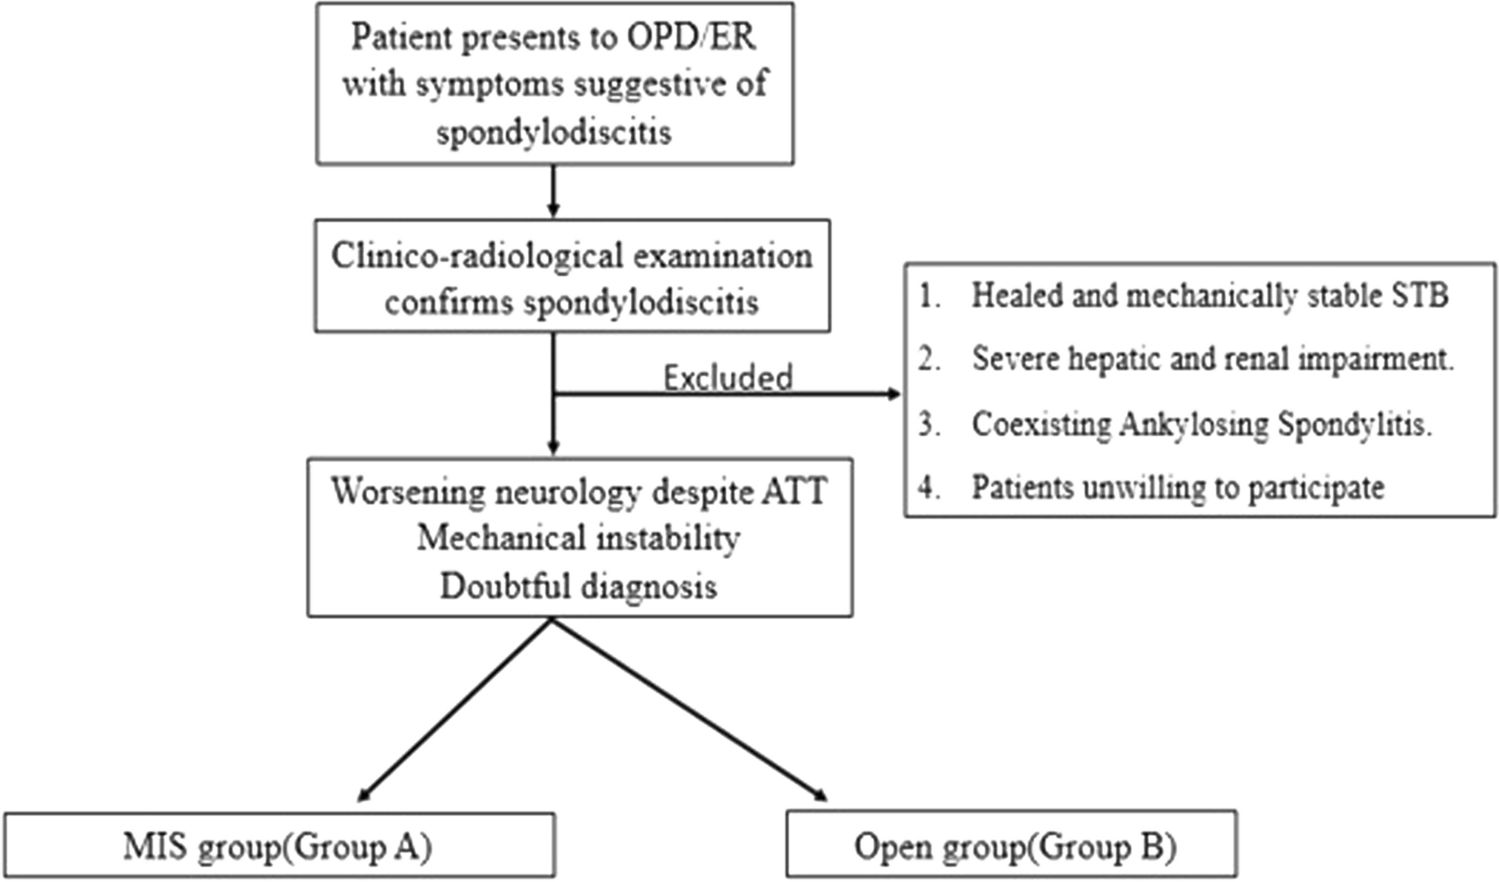 Outcomes of Dorsolumbar and Lumbar Spinal Tuberculosis Treated by Minimally Invasive and Open Techniques: A Prospective Comparative Study